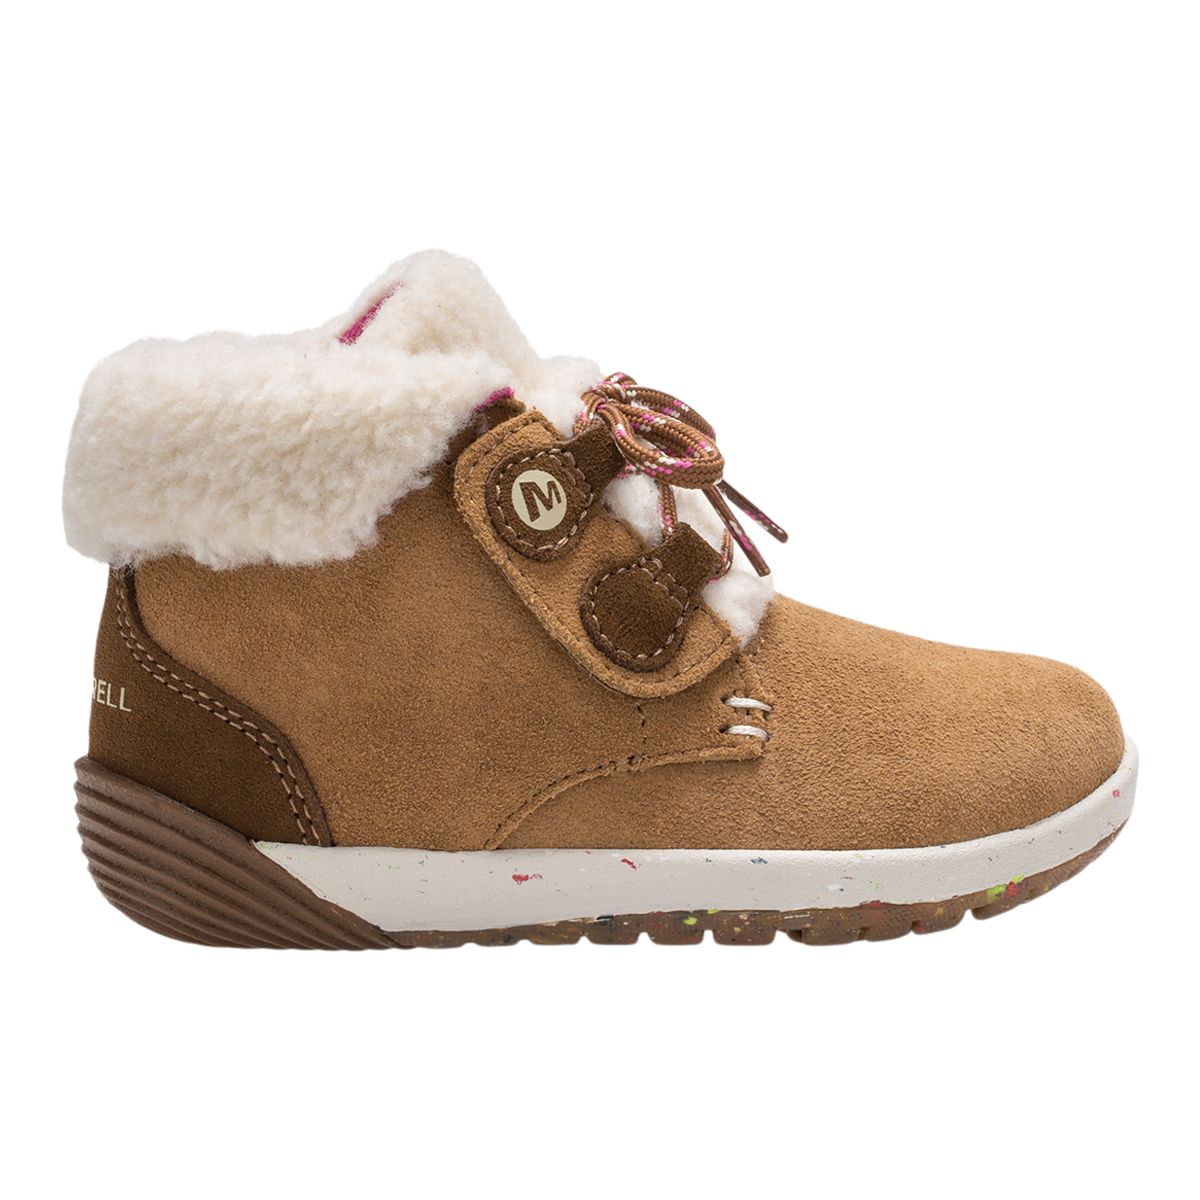 Image of Merrell Toddler Kids' Bare Steps Cocoa Boots